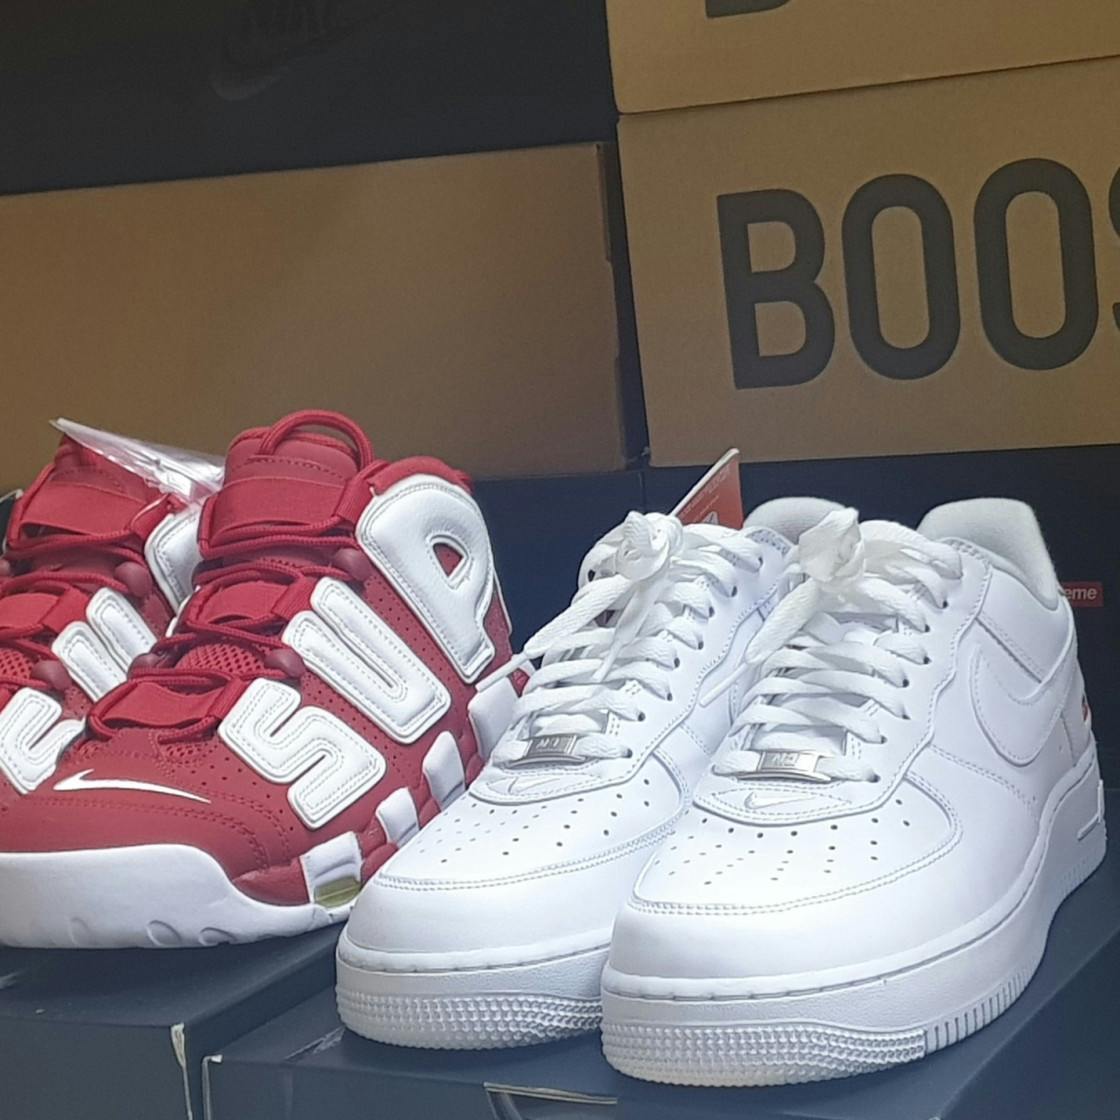 Supreme x Nike Air More Uptempo 'Red' 902290-600 - 902290-600 ...